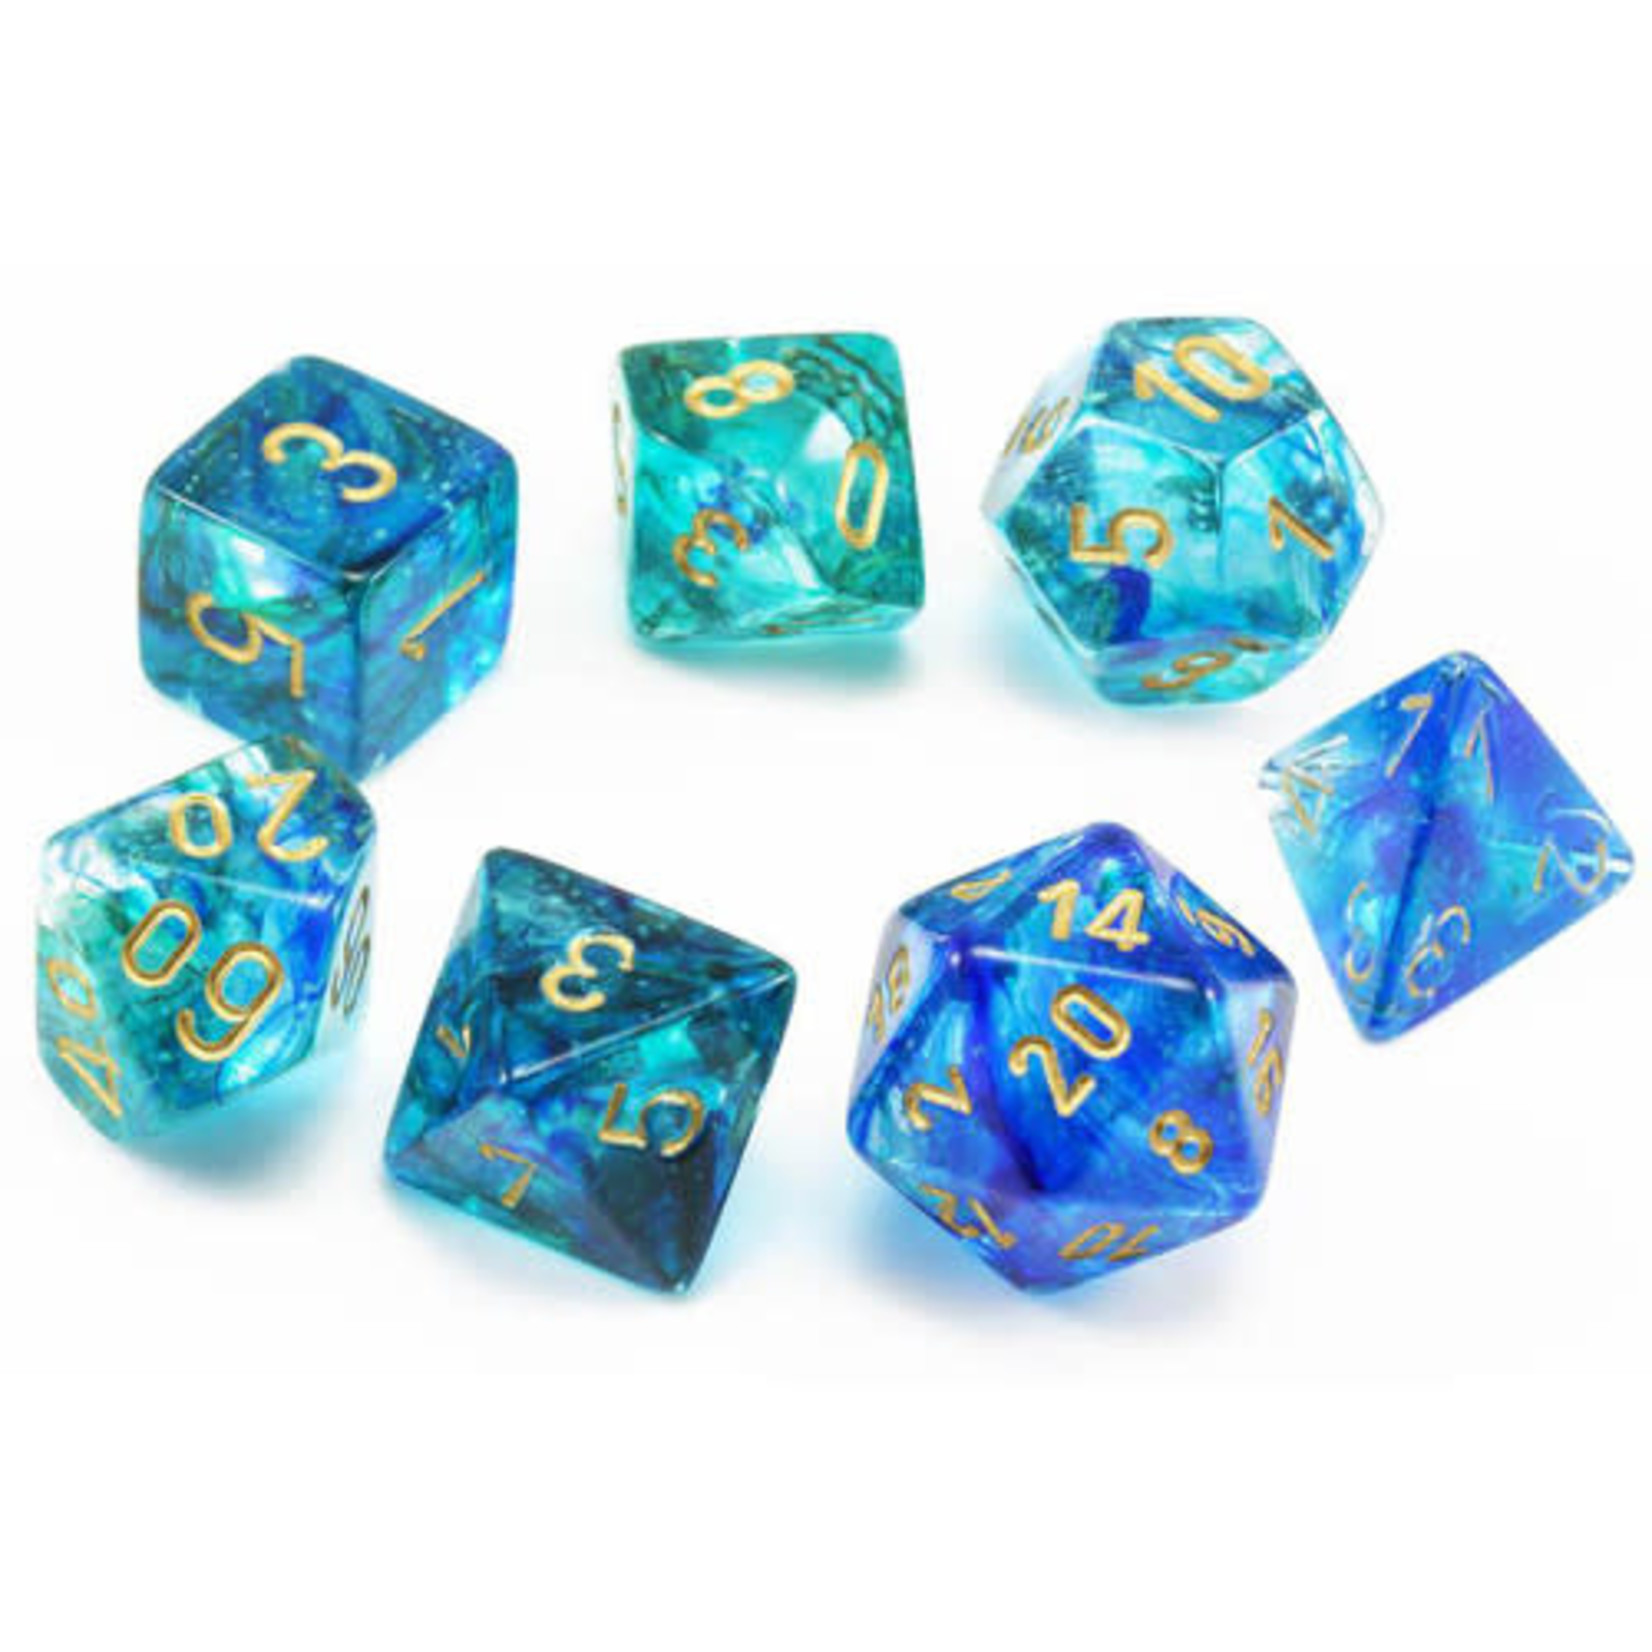 Chessex Chessex Nebula Oceanic with Gold Luminary Polyhedral 7 die set